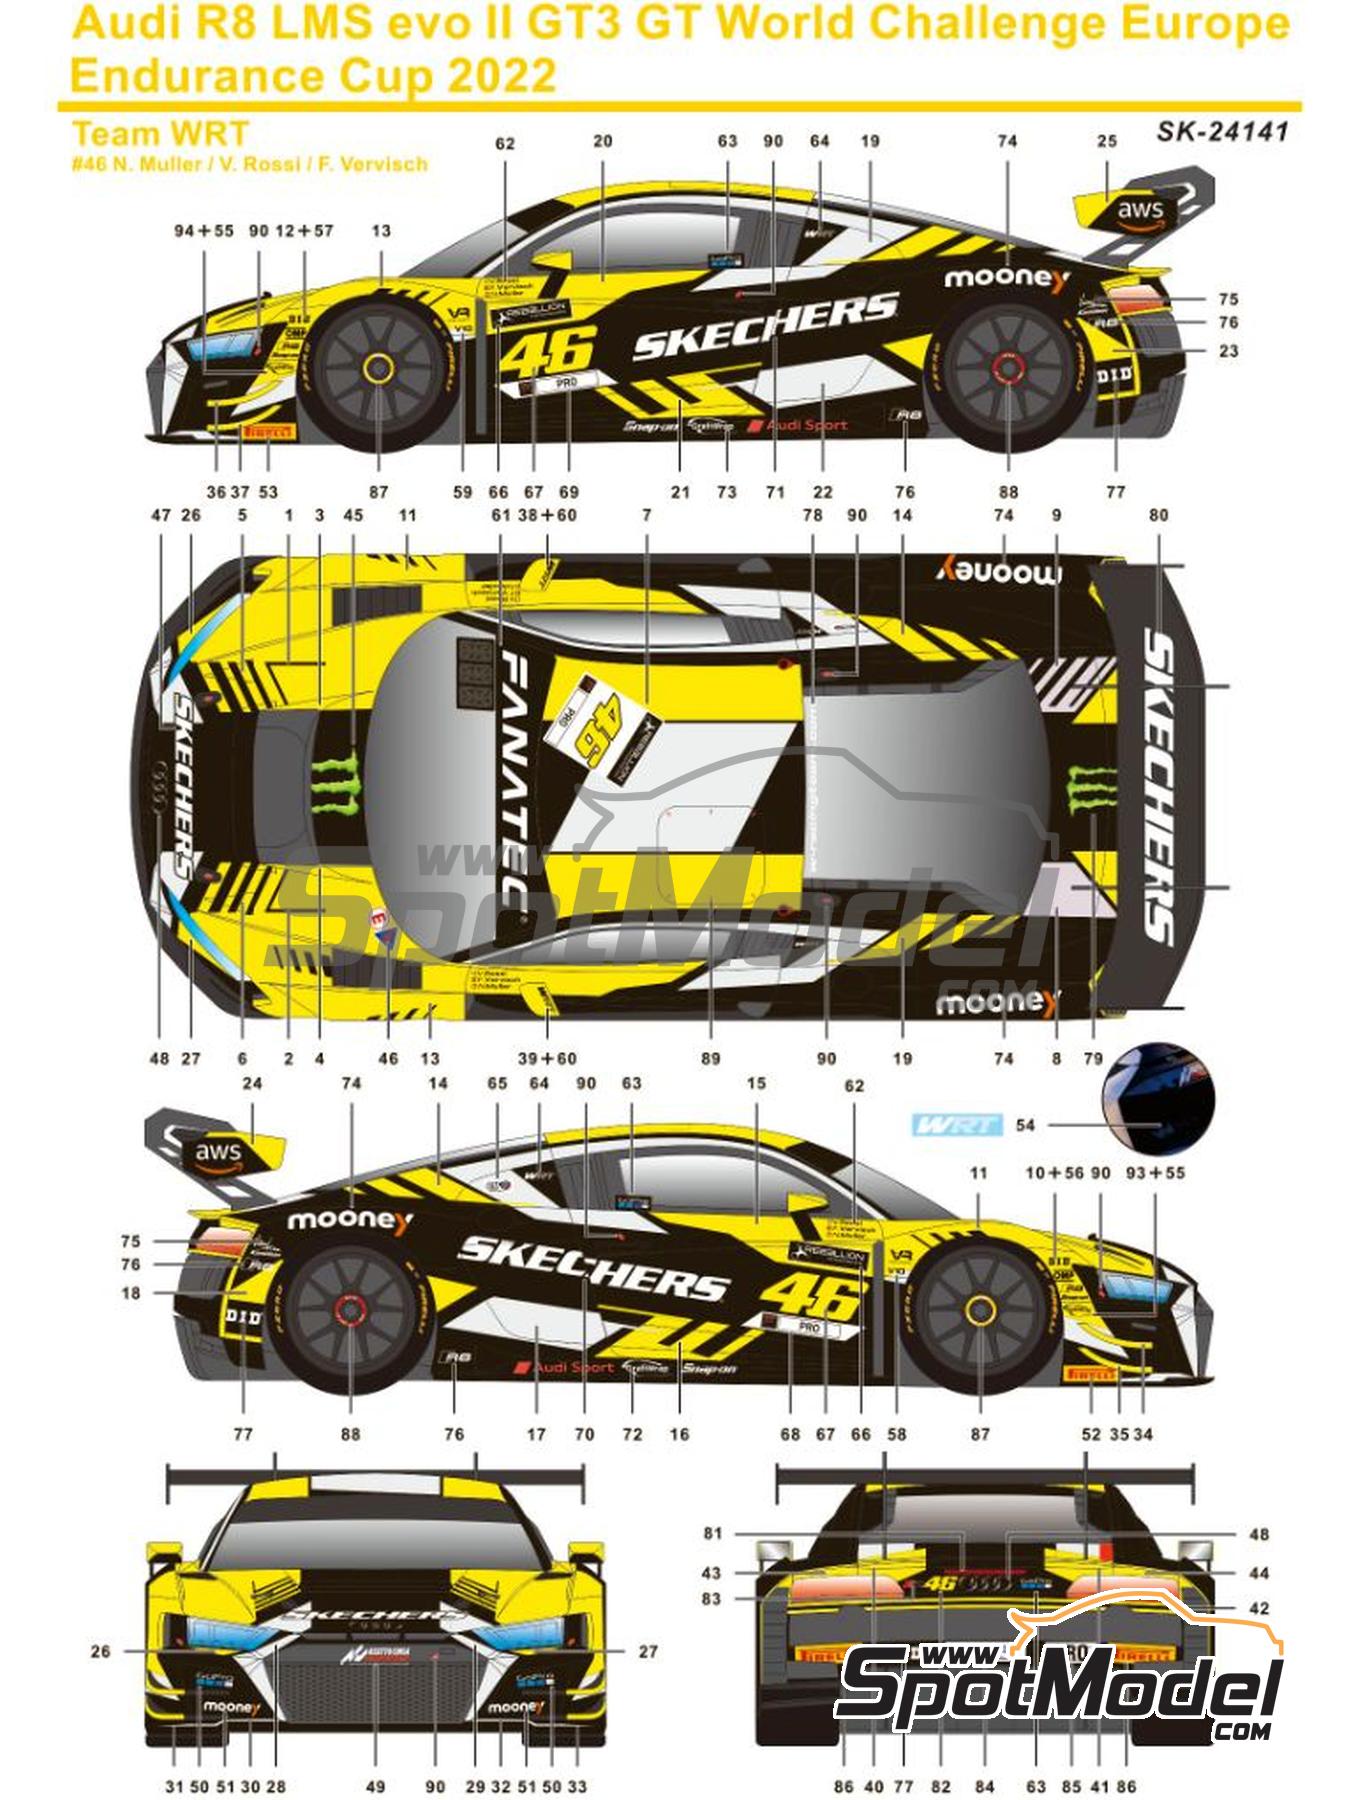 SK Decals SK24141: Marking / livery 1/24 scale - Audi R8 LMS GT3